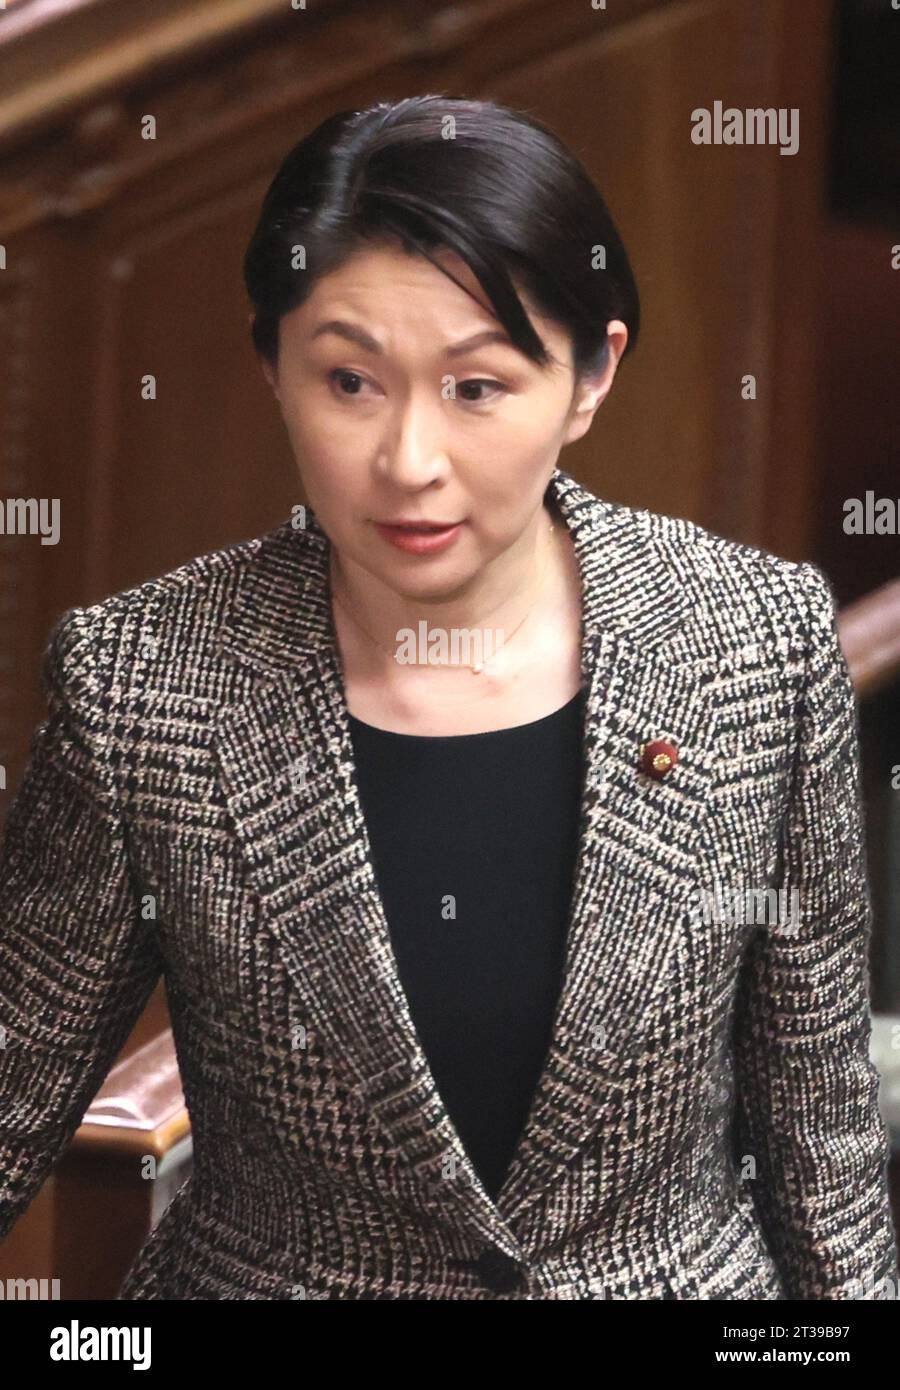 Tokyo, Japan. 24th Oct, 2023. Japan's ruling Liberal Democratic Party (LDP) election strategic committee chairwoman Yuko Obuchi arrives at Lower House's plenary session at the National Diet in Tokyo on Tuesday, October 24, 2023. LDP lost one of two seats at the national by-election on October 22. (photo by Yoshio Tsunoda/AFLO) Stock Photo